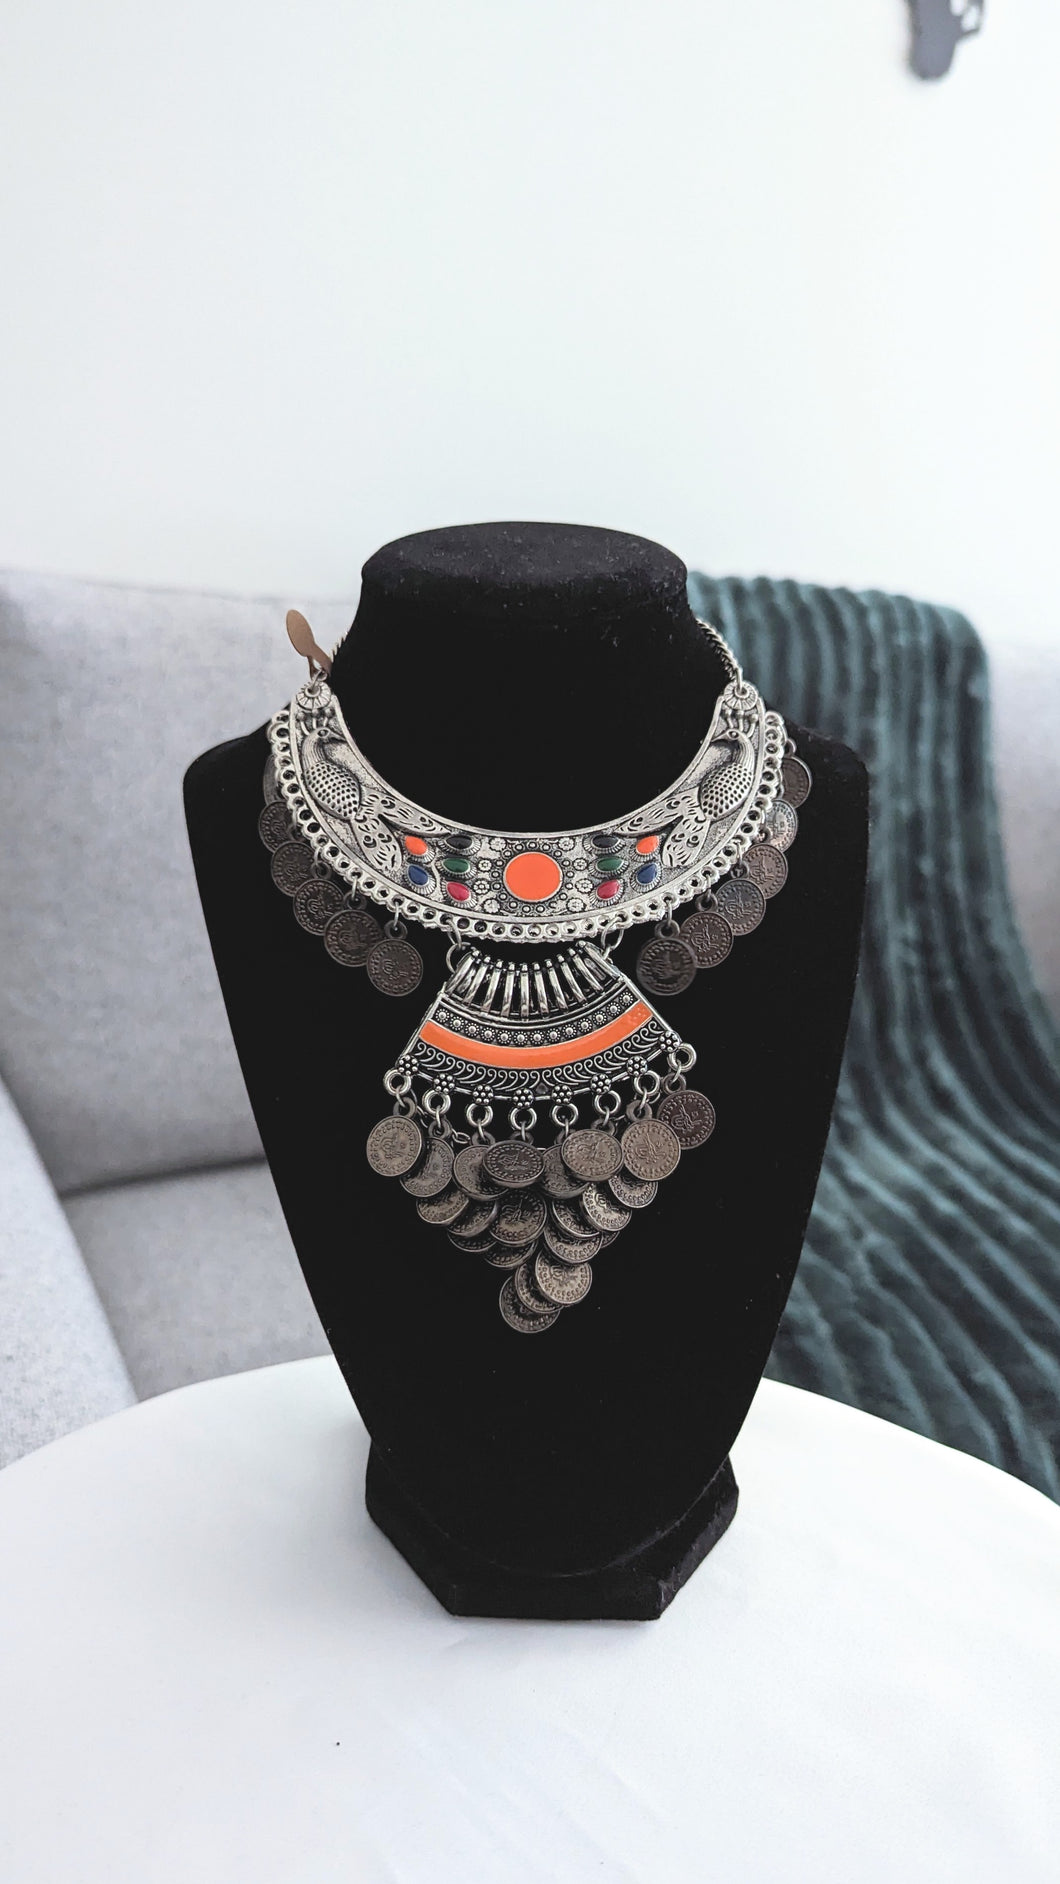 Long Afghani necklace in oxidized silver. Available in statement orange color as well!